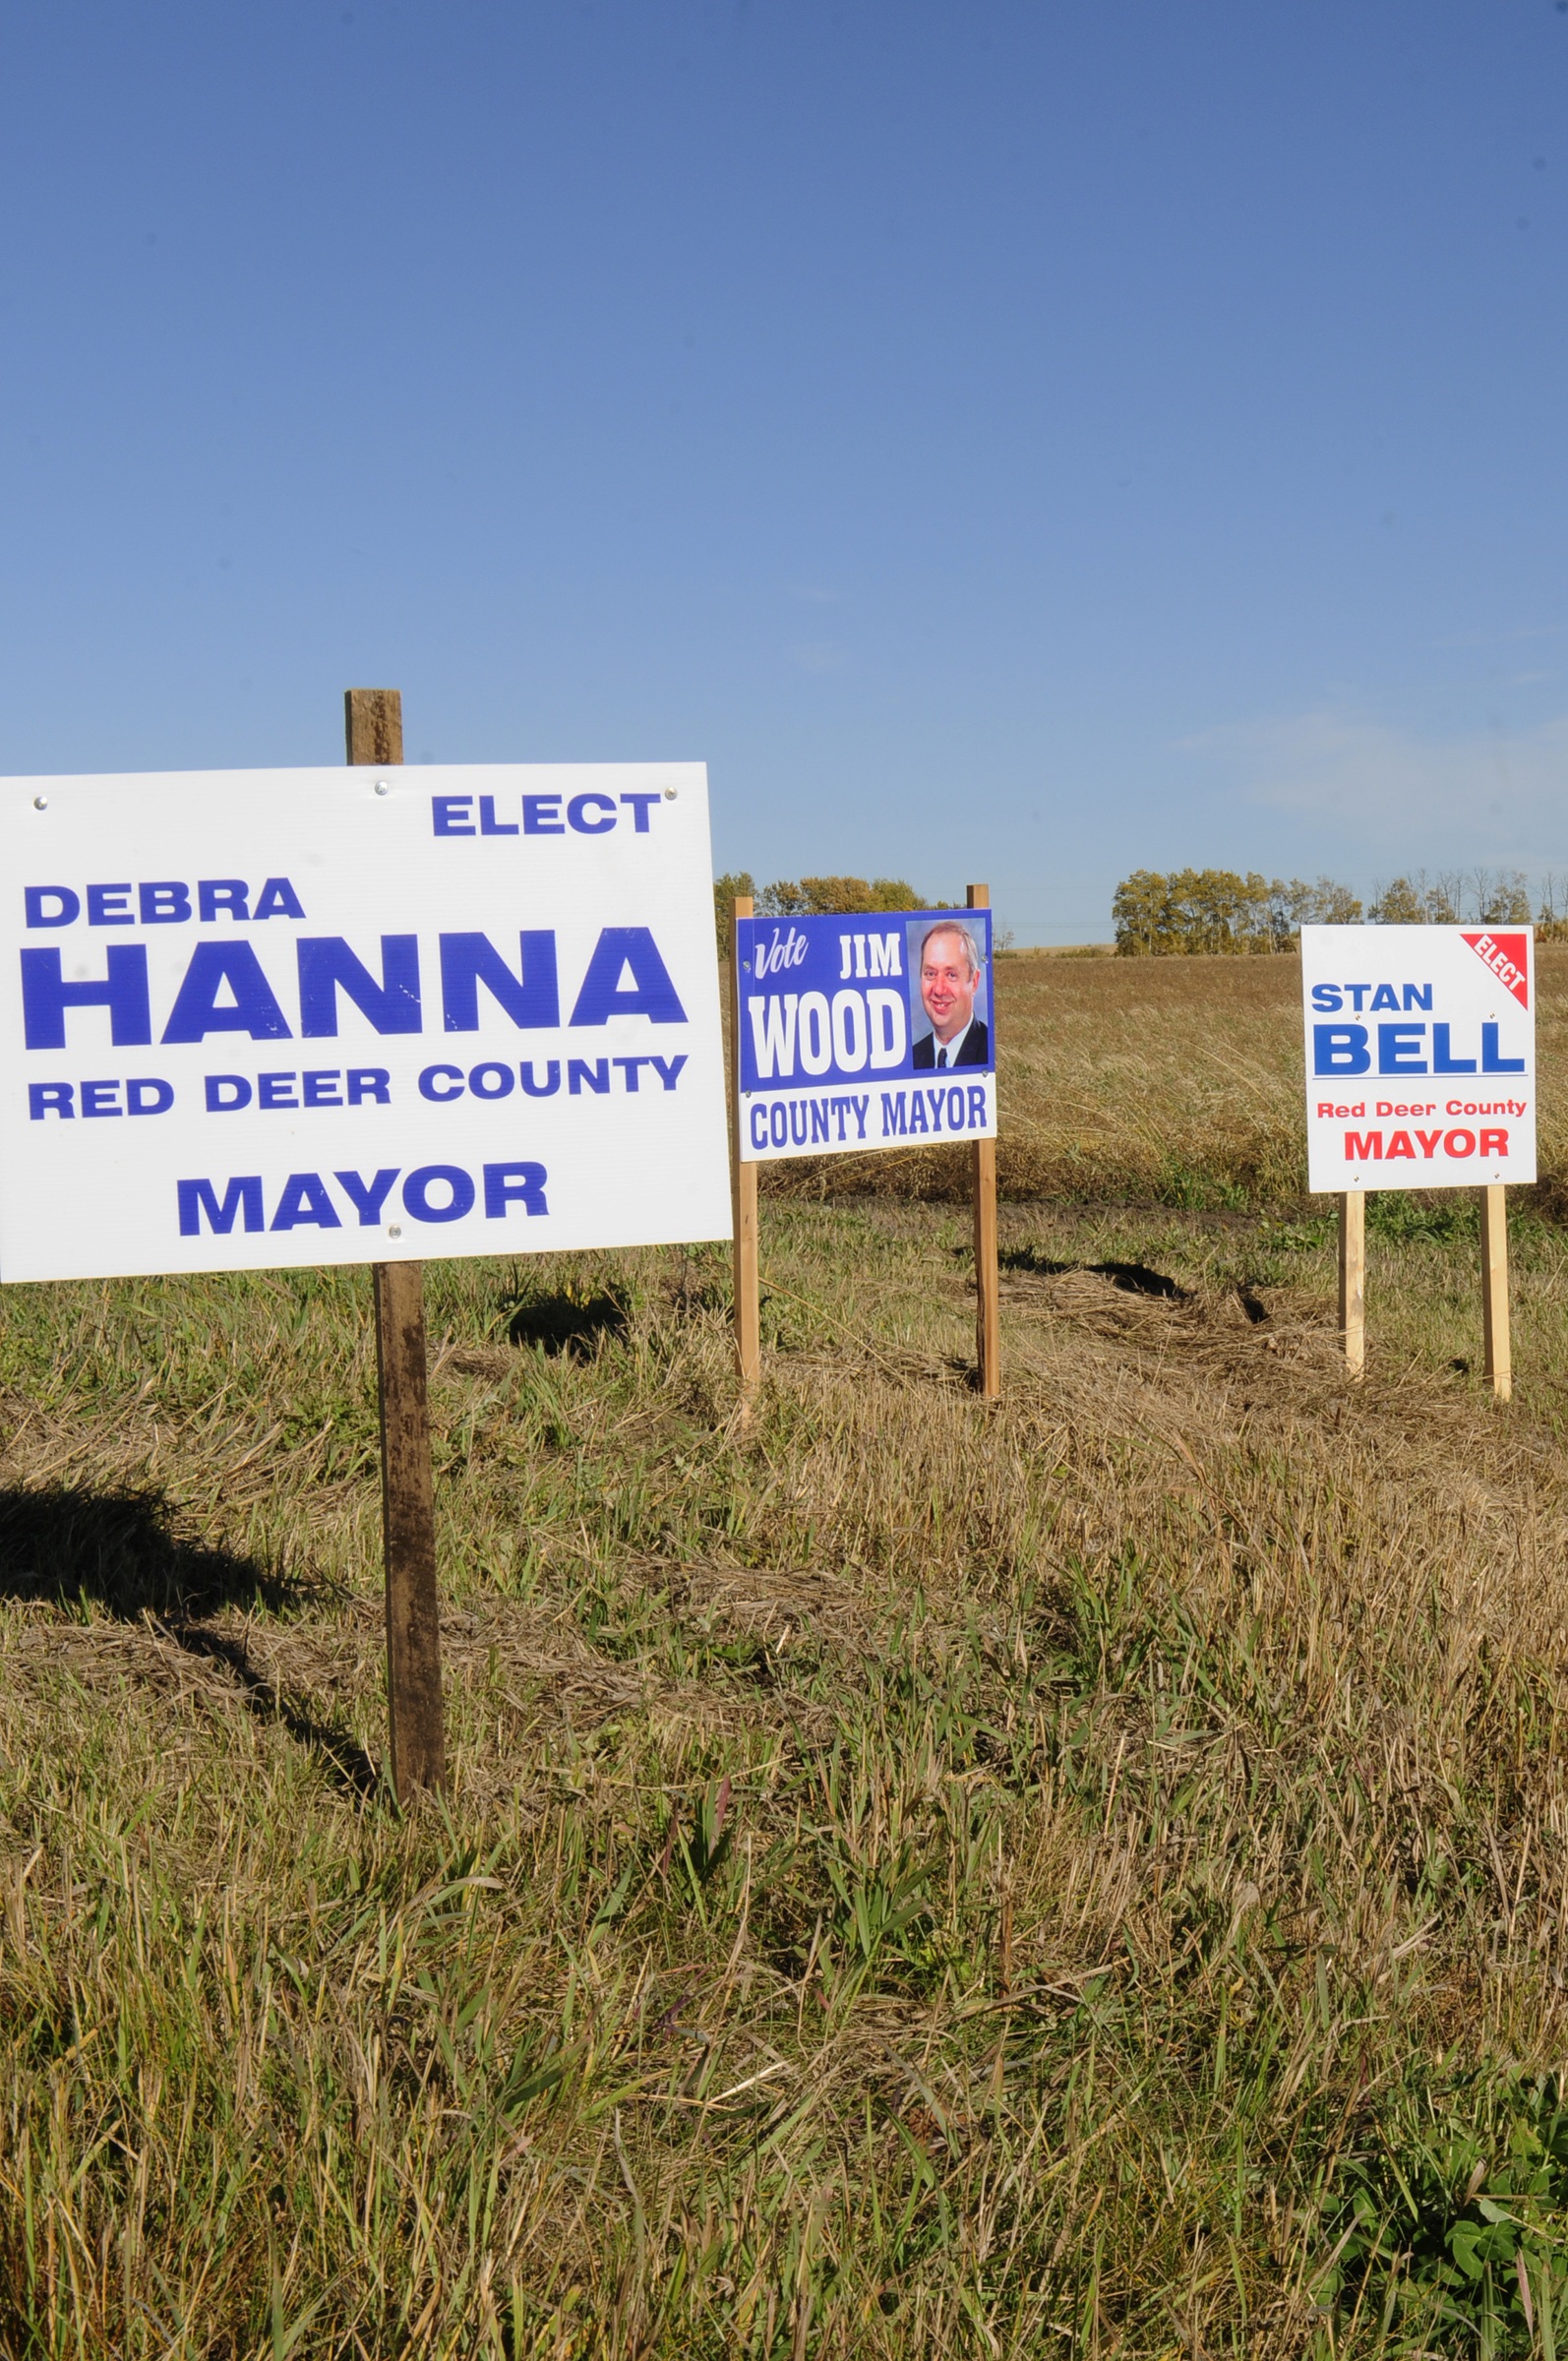 SIGNS EVERYWHERE - The Red Deer County election race is in full swing with signs dotting the rural landscape.